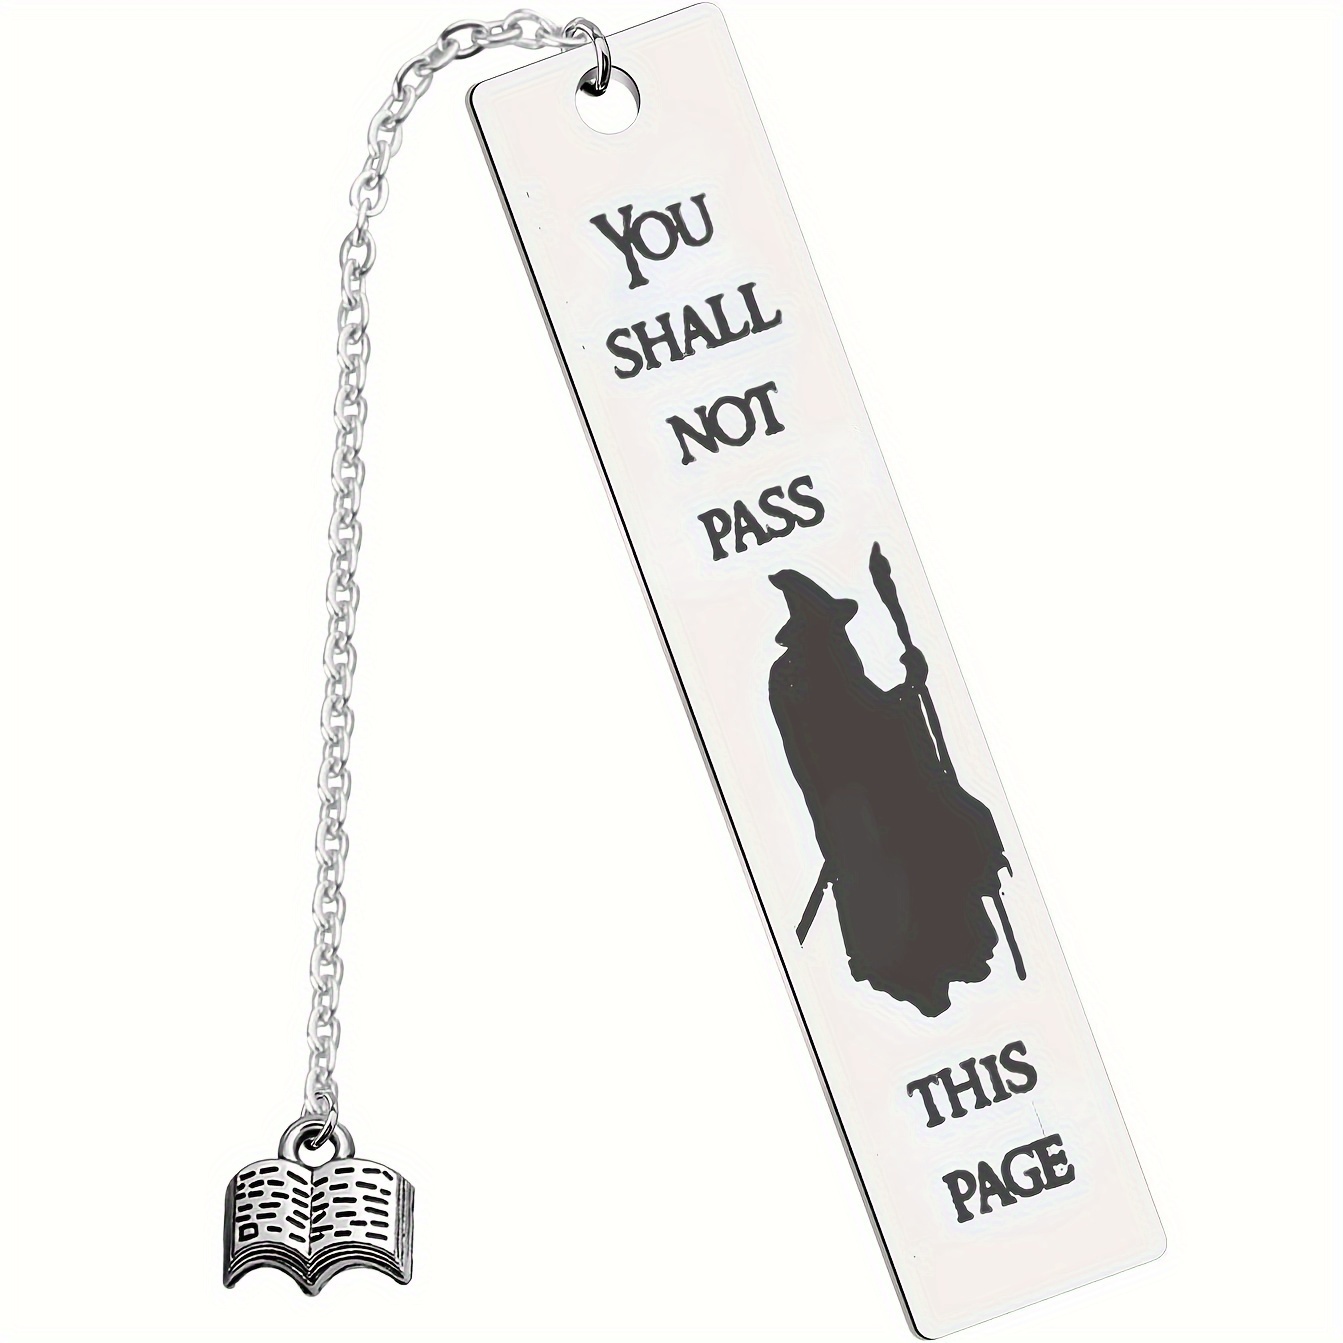 

You Shall Not Pass This Page Bookmark Bookish Gift For Fans Bookworm Bookmark Gift